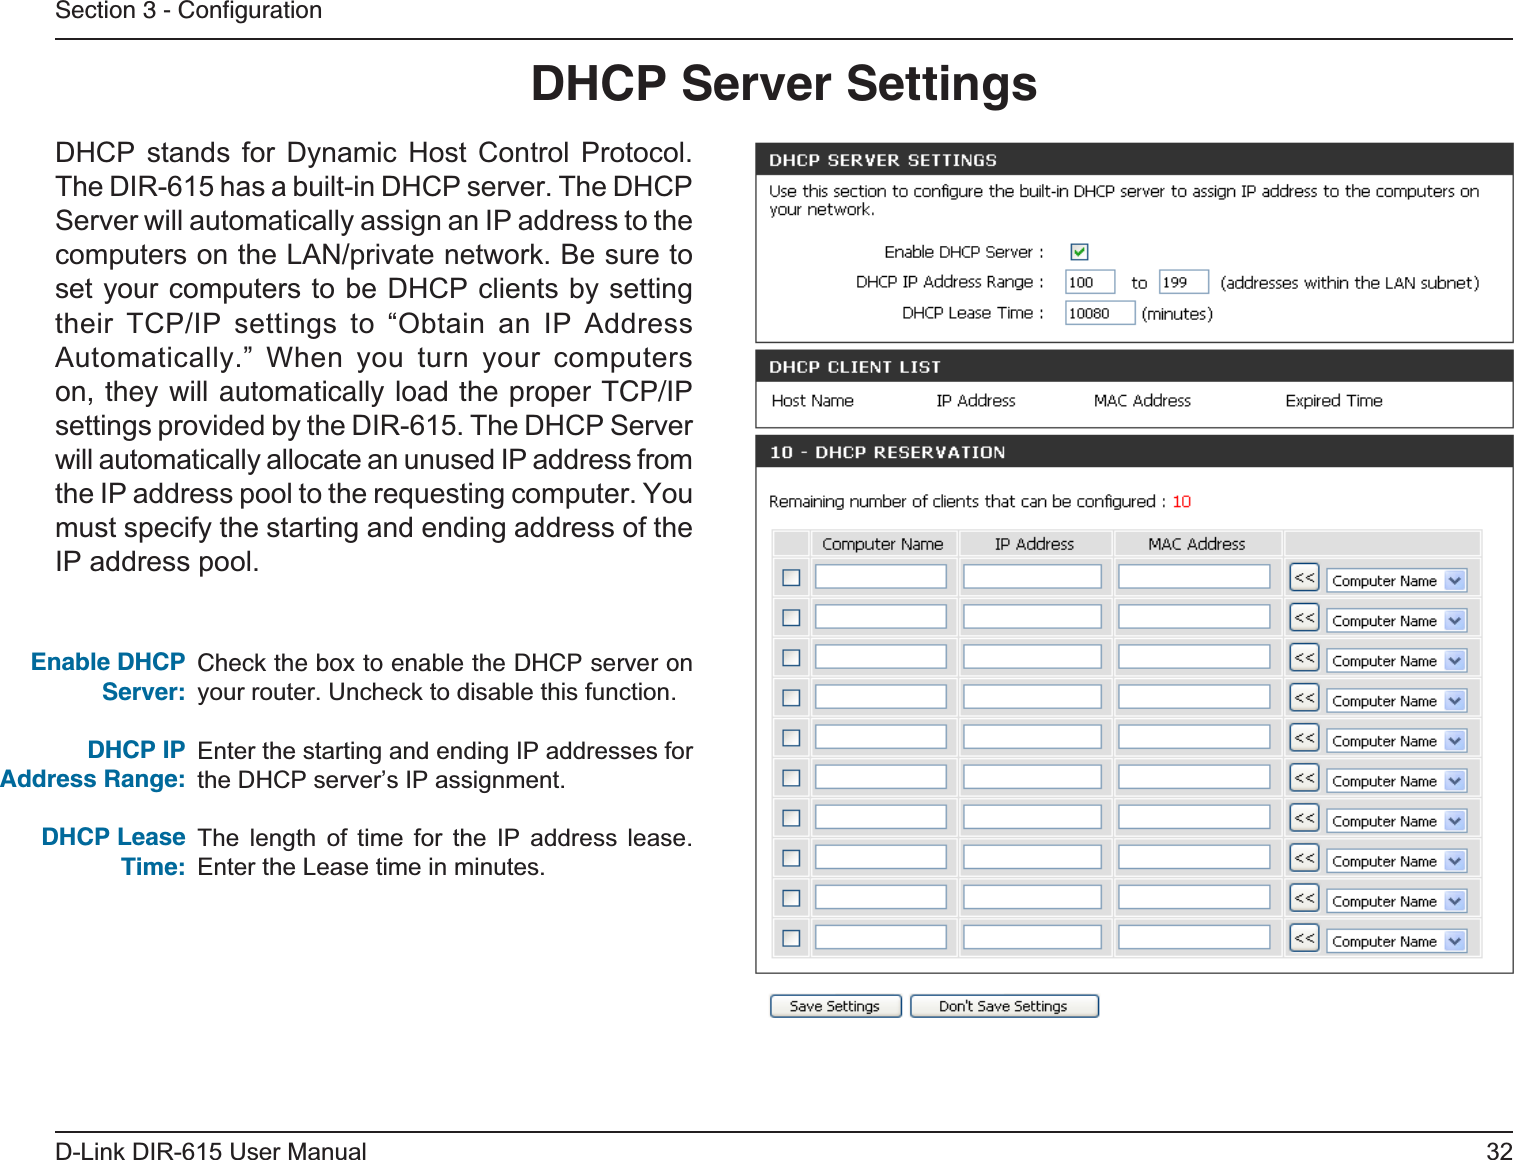 32D-Link DIR-615 User ManualSection 3 - ConﬁgurationCheck the box to enable the DHCP server on your router. Uncheck to disable this function.Enter the starting and ending IP addresses for the DHCP server’s IP assignment.The length of time for the IP address lease. Enter the Lease time in minutes.Enable DHCP Server:DHCP IPAddress Range:DHCP Lease Time:DHCP Server SettingsDHCP stands for Dynamic Host Control Protocol. The DIR-615 has a built-in DHCP server. The DHCP Server will automatically assign an IP address to the computers on the LAN/private network. Be sure to set your computers to be DHCP clients by setting their TCP/IP settings to “Obtain an IP Address Automatically.” When you turn your computers on, they will automatically load the proper TCP/IP settings provided by the DIR-615. The DHCP Server will automatically allocate an unused IP address from the IP address pool to the requesting computer. You must specify the starting and ending address of the IP address pool.